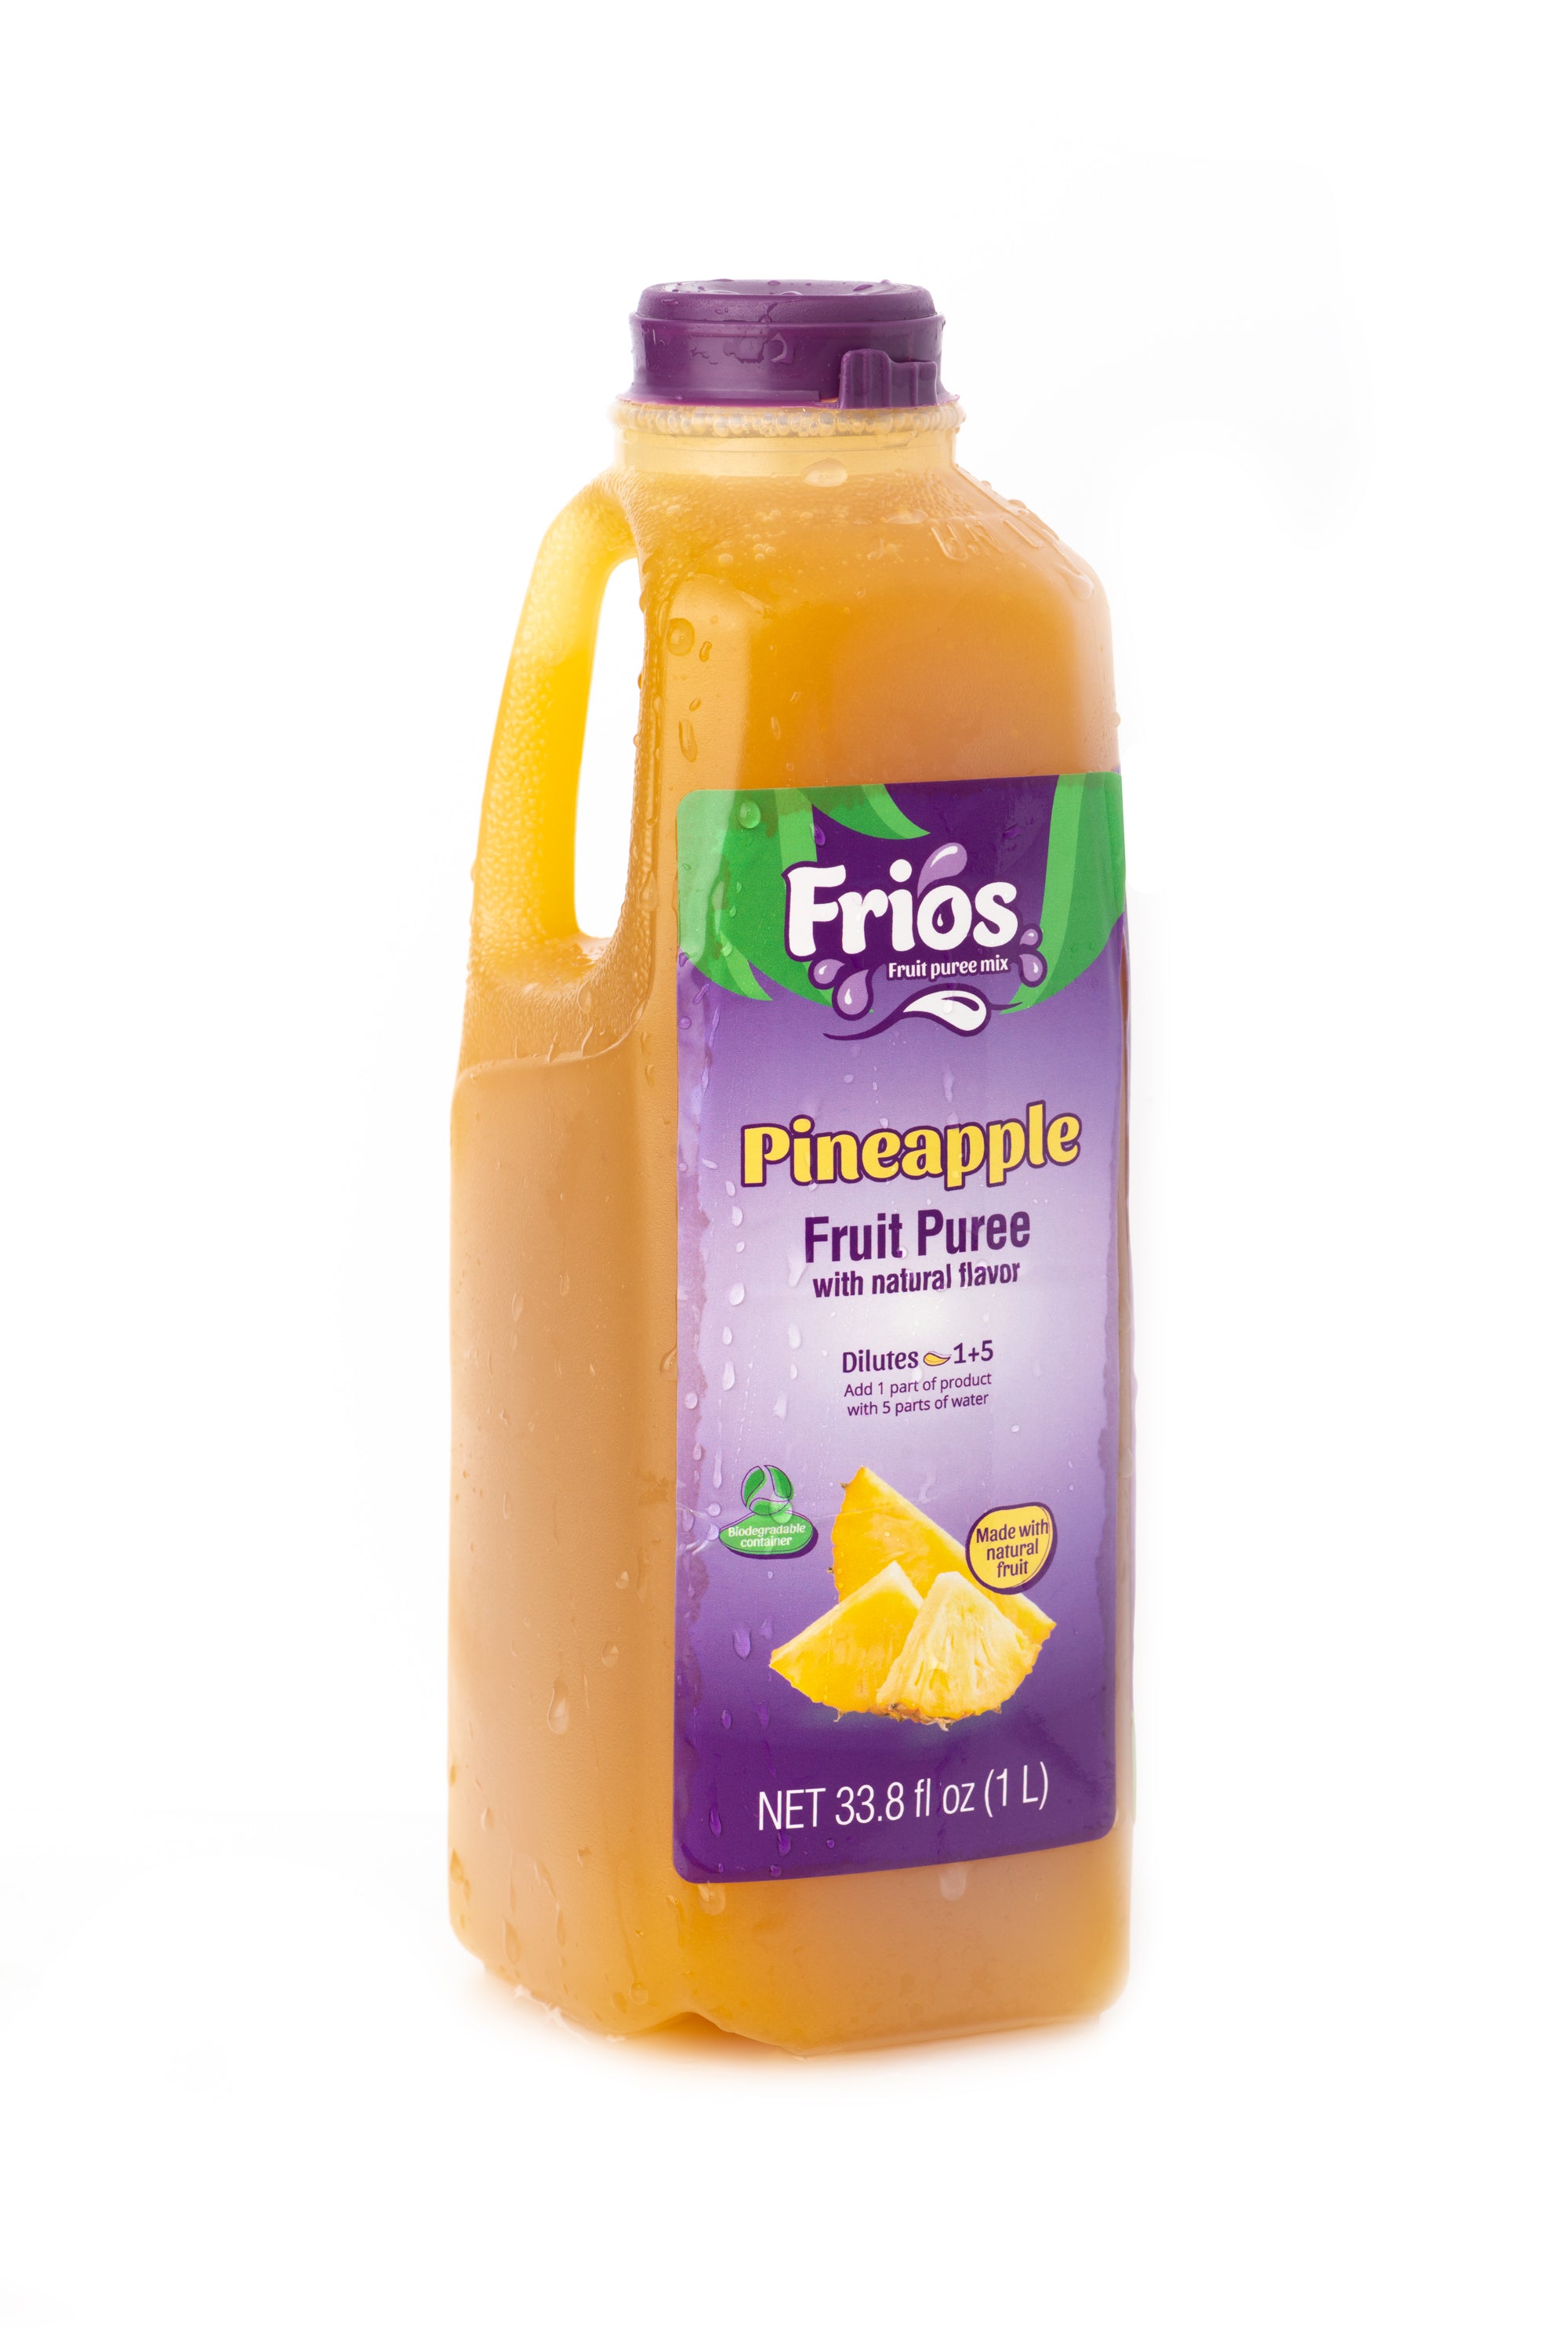 Buy Pineapple Fruit Puree Mix - Elevate Your Culinary Creations with Friendly Fruits' Tropical Blend